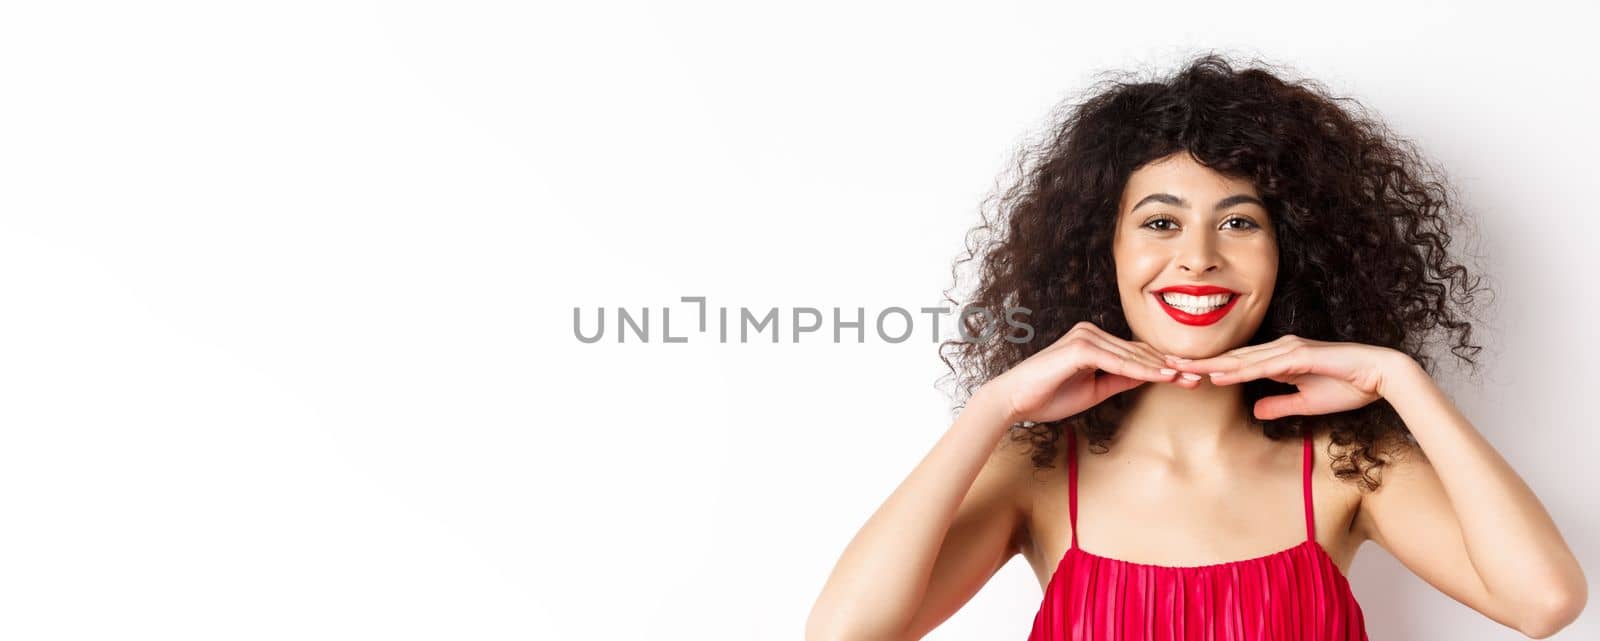 Beauty and makeup. Pretty lady with curly hair, red lips and white teeth, smiling and showing perfect face, standing on white background.